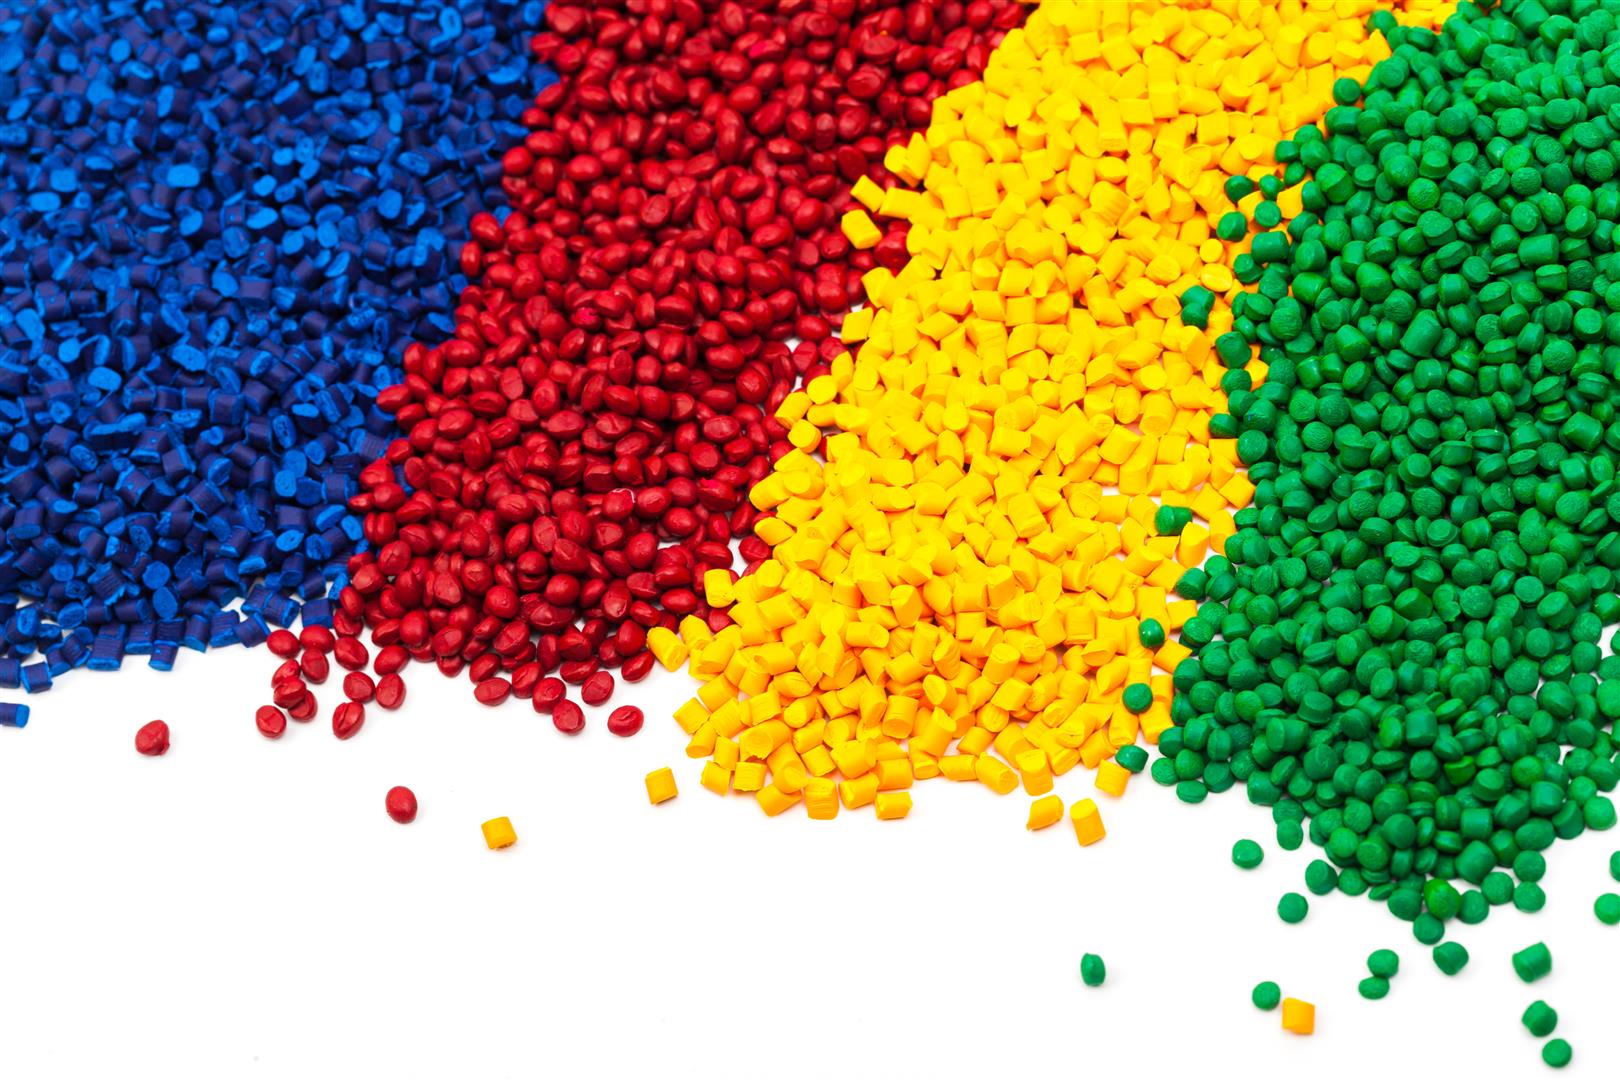 tinted plastic granulate for injection moulding process